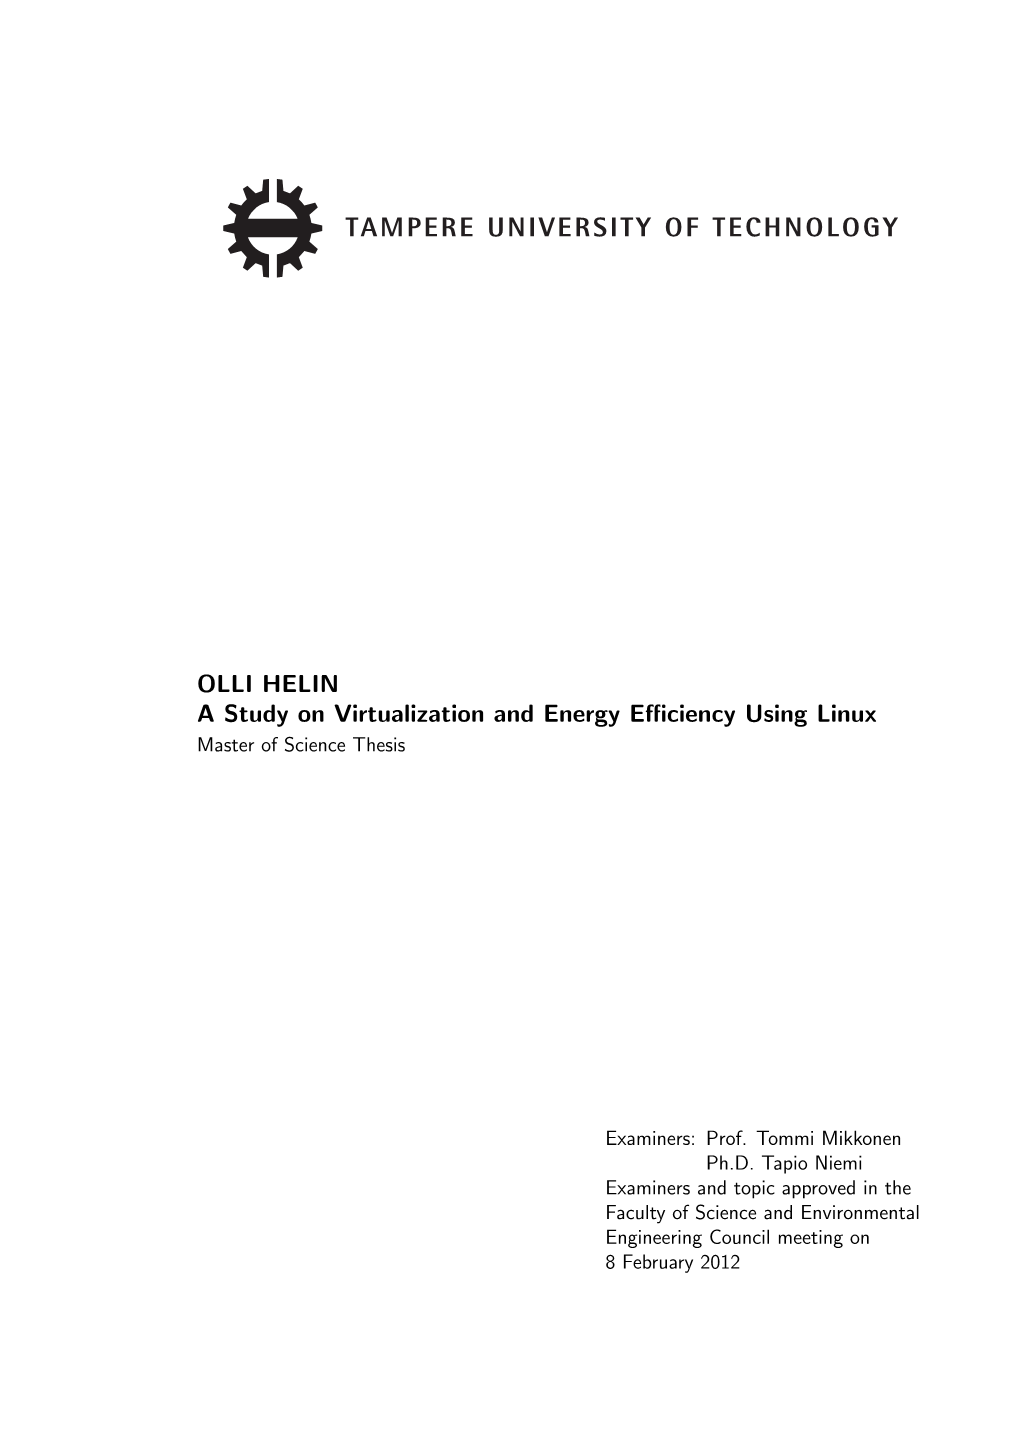 OLLI HELIN a Study on Virtualization and Energy Efficiency Using Linux